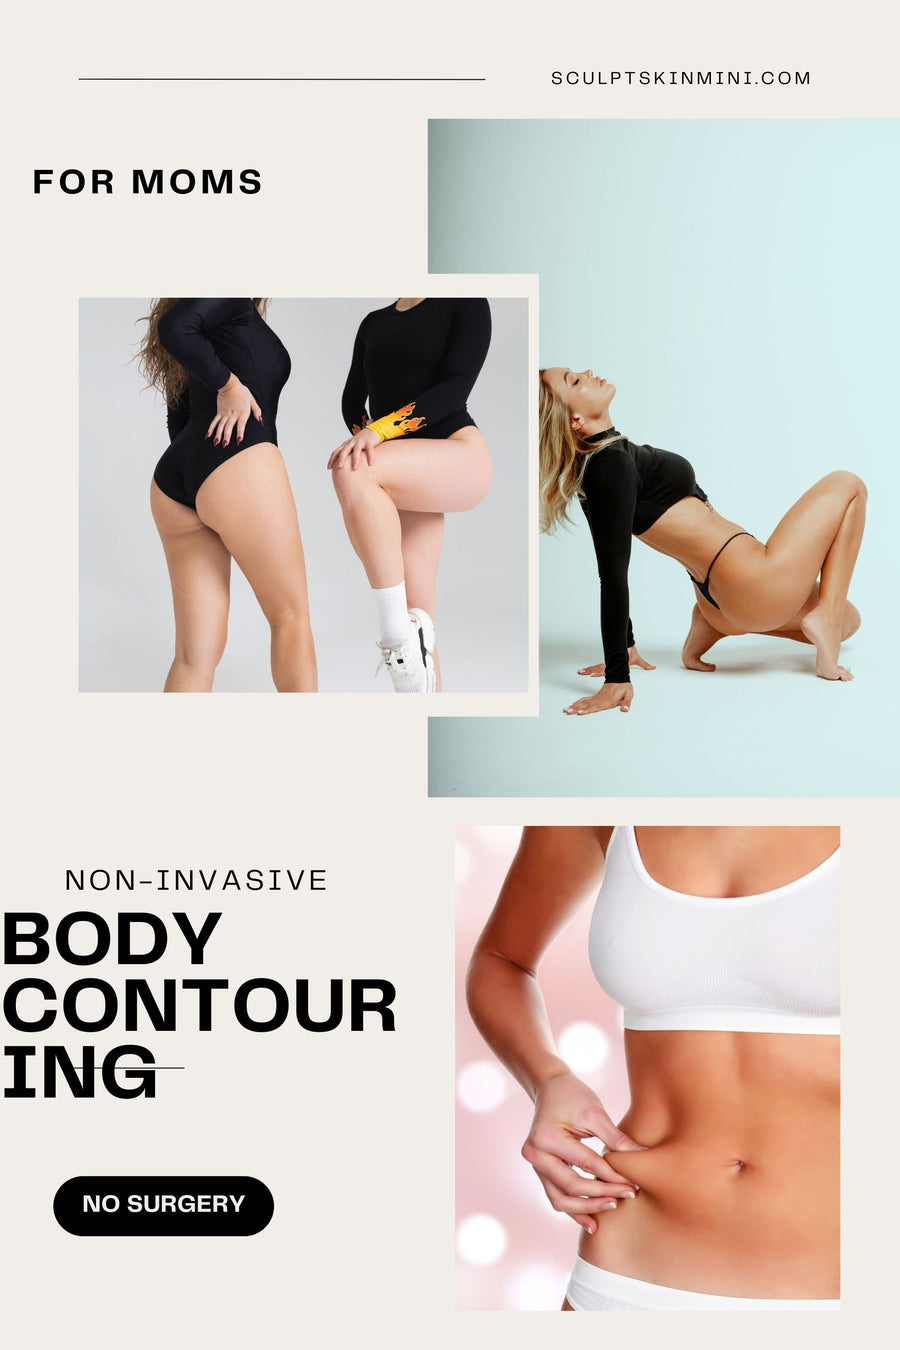 ultrasonic cavitation radio frequency skin tightening body sculpting machine fat reduction cellulite stretchmark skin tightening device machine  The Hidden Hurdles: 11 Reasons You May Not Be Losing Weight - SculptSkin